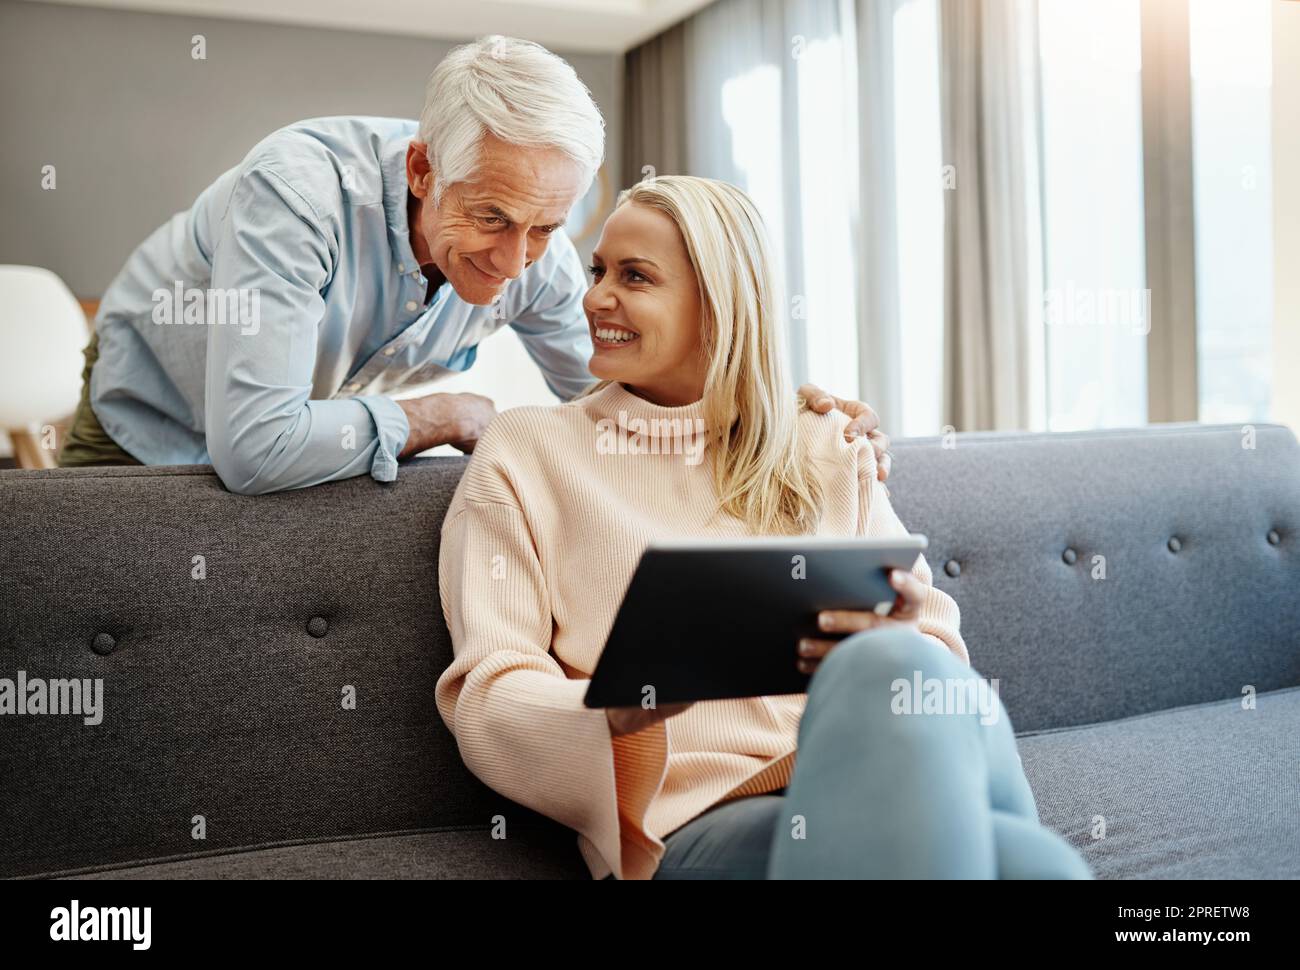 Hey honey, take a look at this. a mature couple using a digital tablet on the sofa at home. Stock Photo